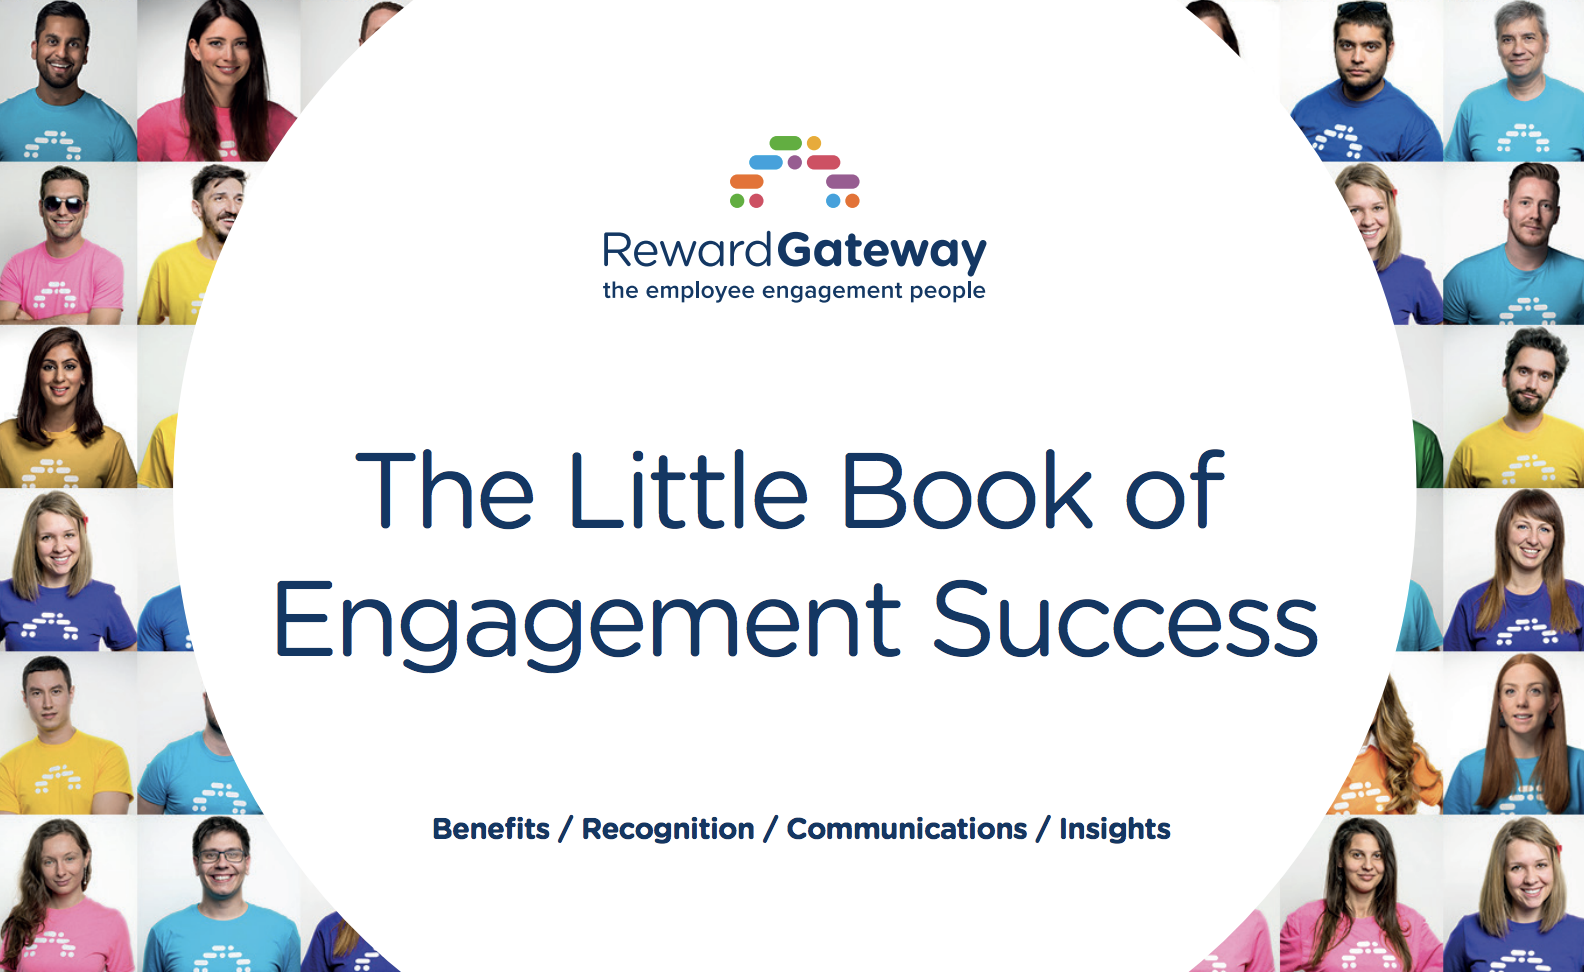 Examples of employee engagement programs